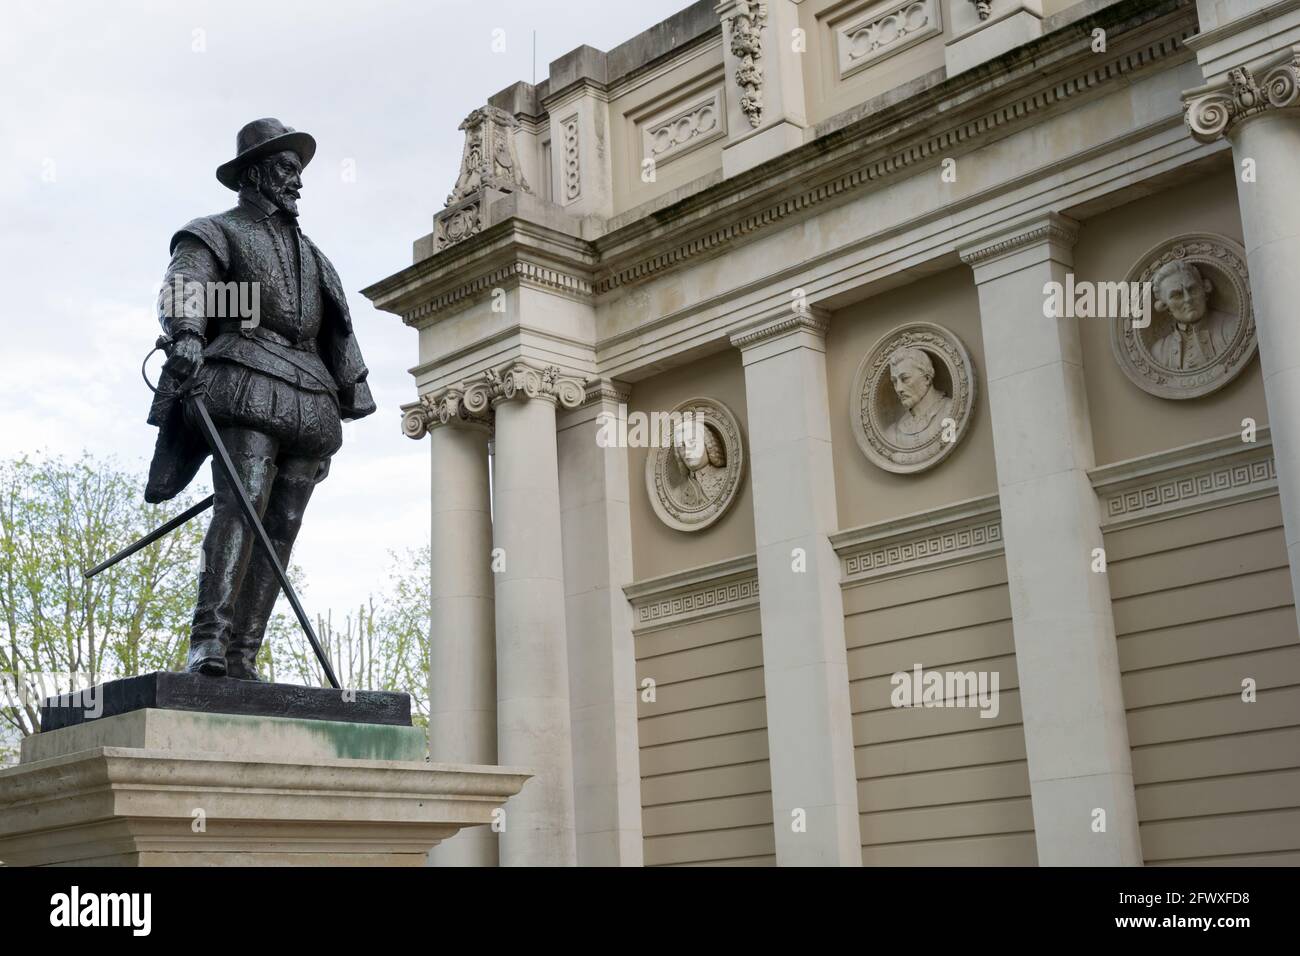 Statue de sir Walter Raleigh, ANCIEN ROYAL NAVAL COLLEGE, Greenwich, Londres, Angleterre, Royaume-Uni, ROYAUME-UNI Banque D'Images